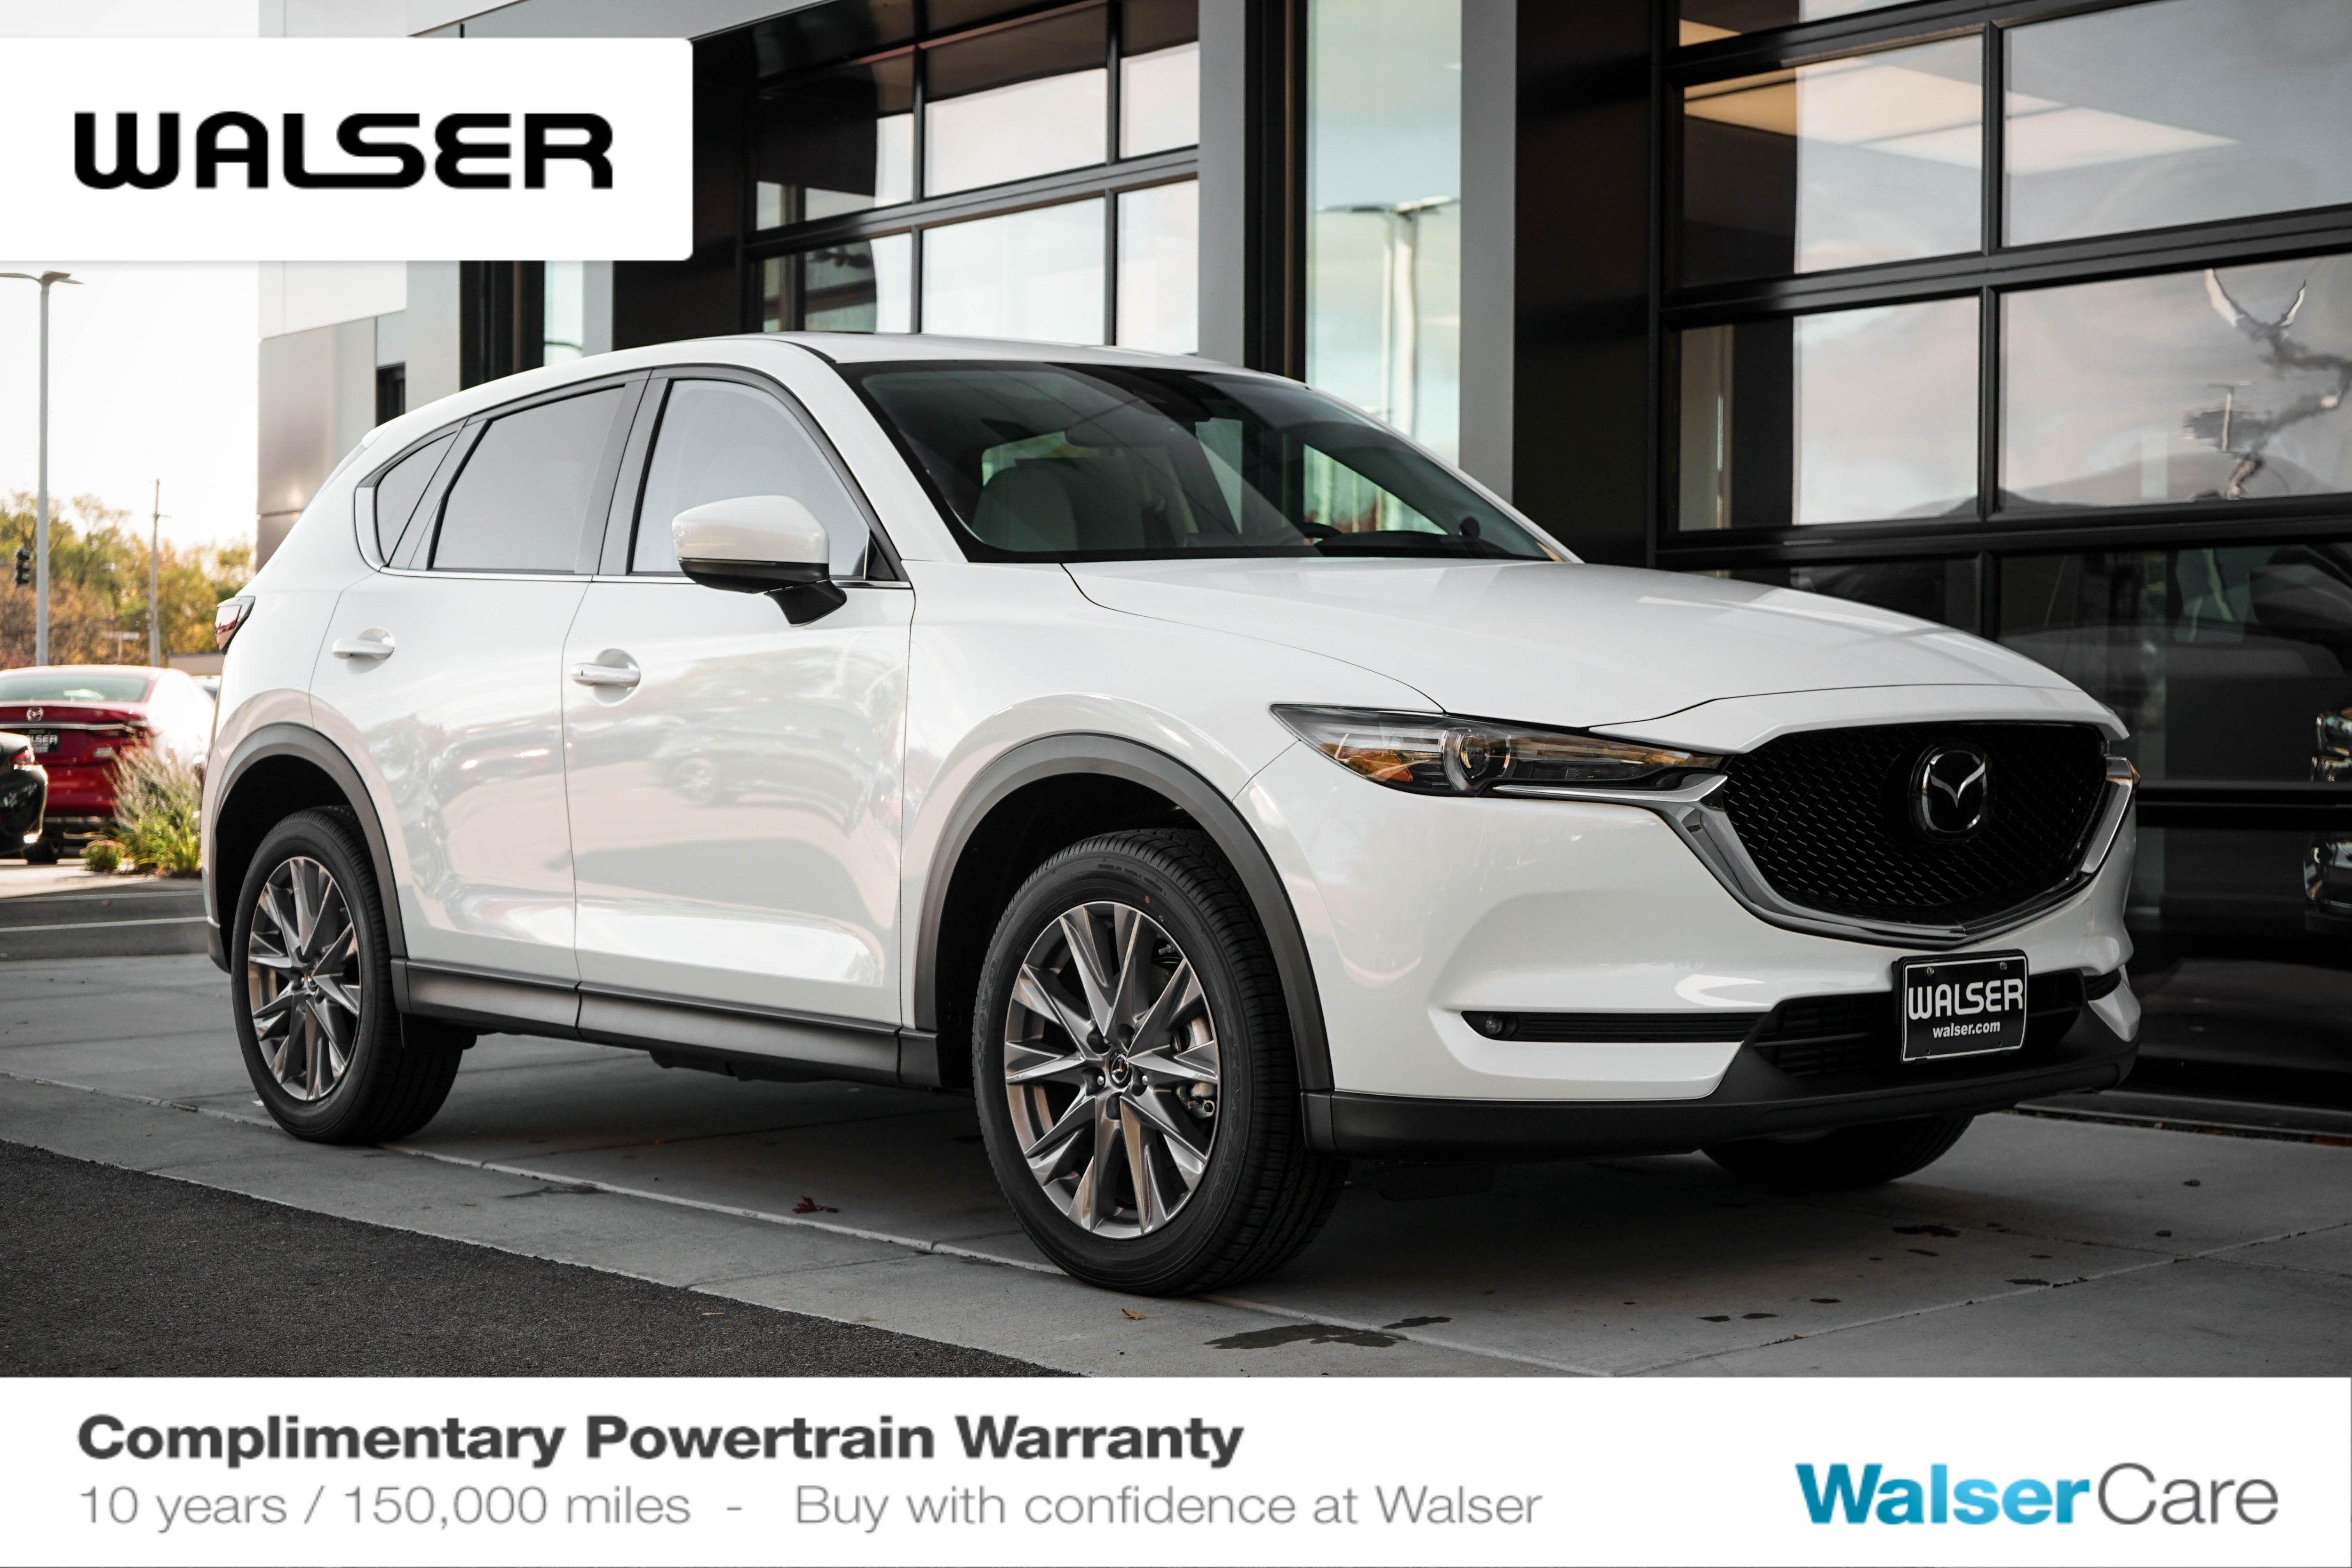 New 2019 Mazda Cx 5 Grand Touring Reserve With Navigation Awd